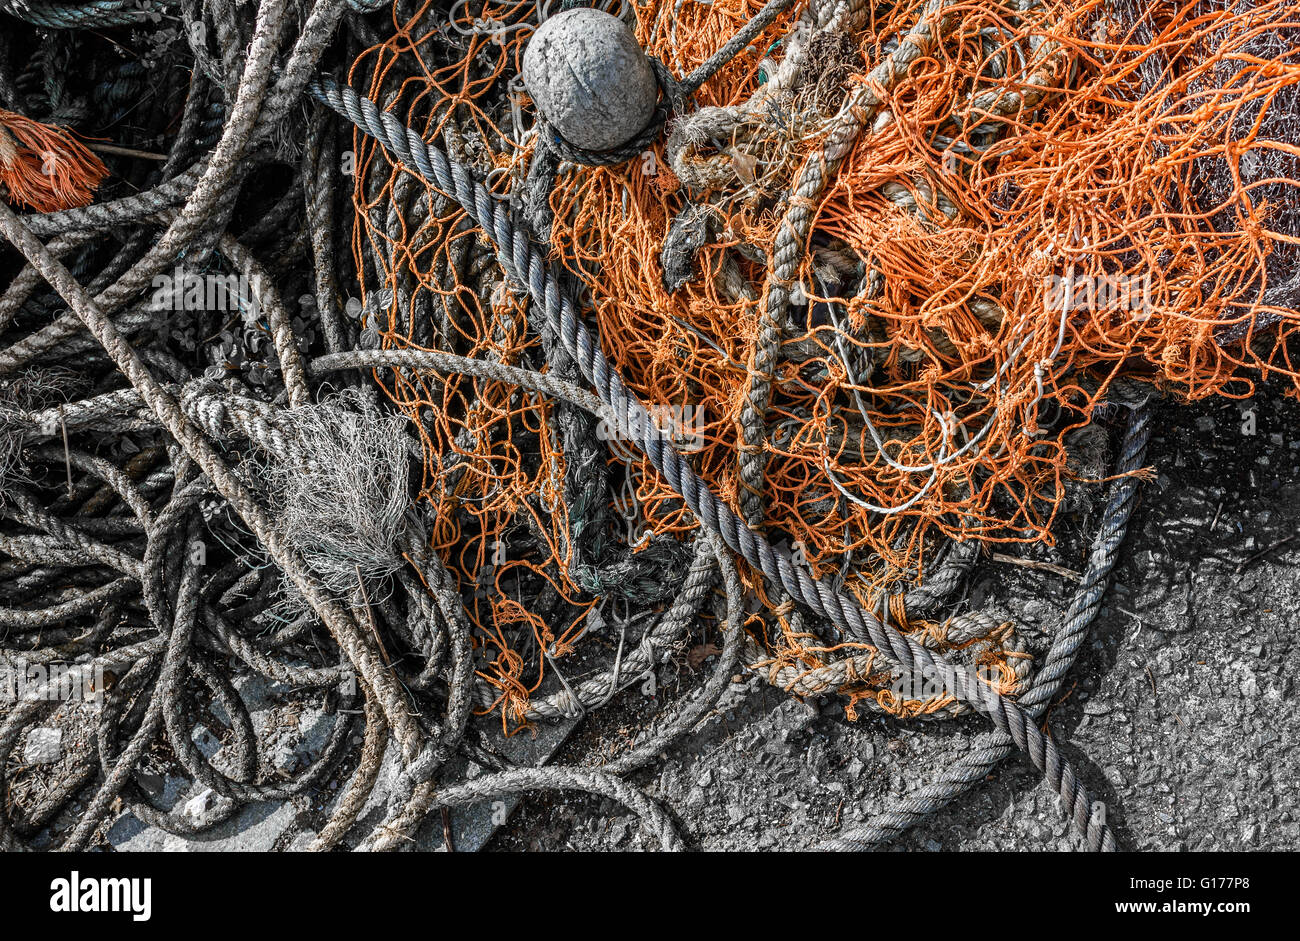 Background of various types of fishing rope. Stock Photo